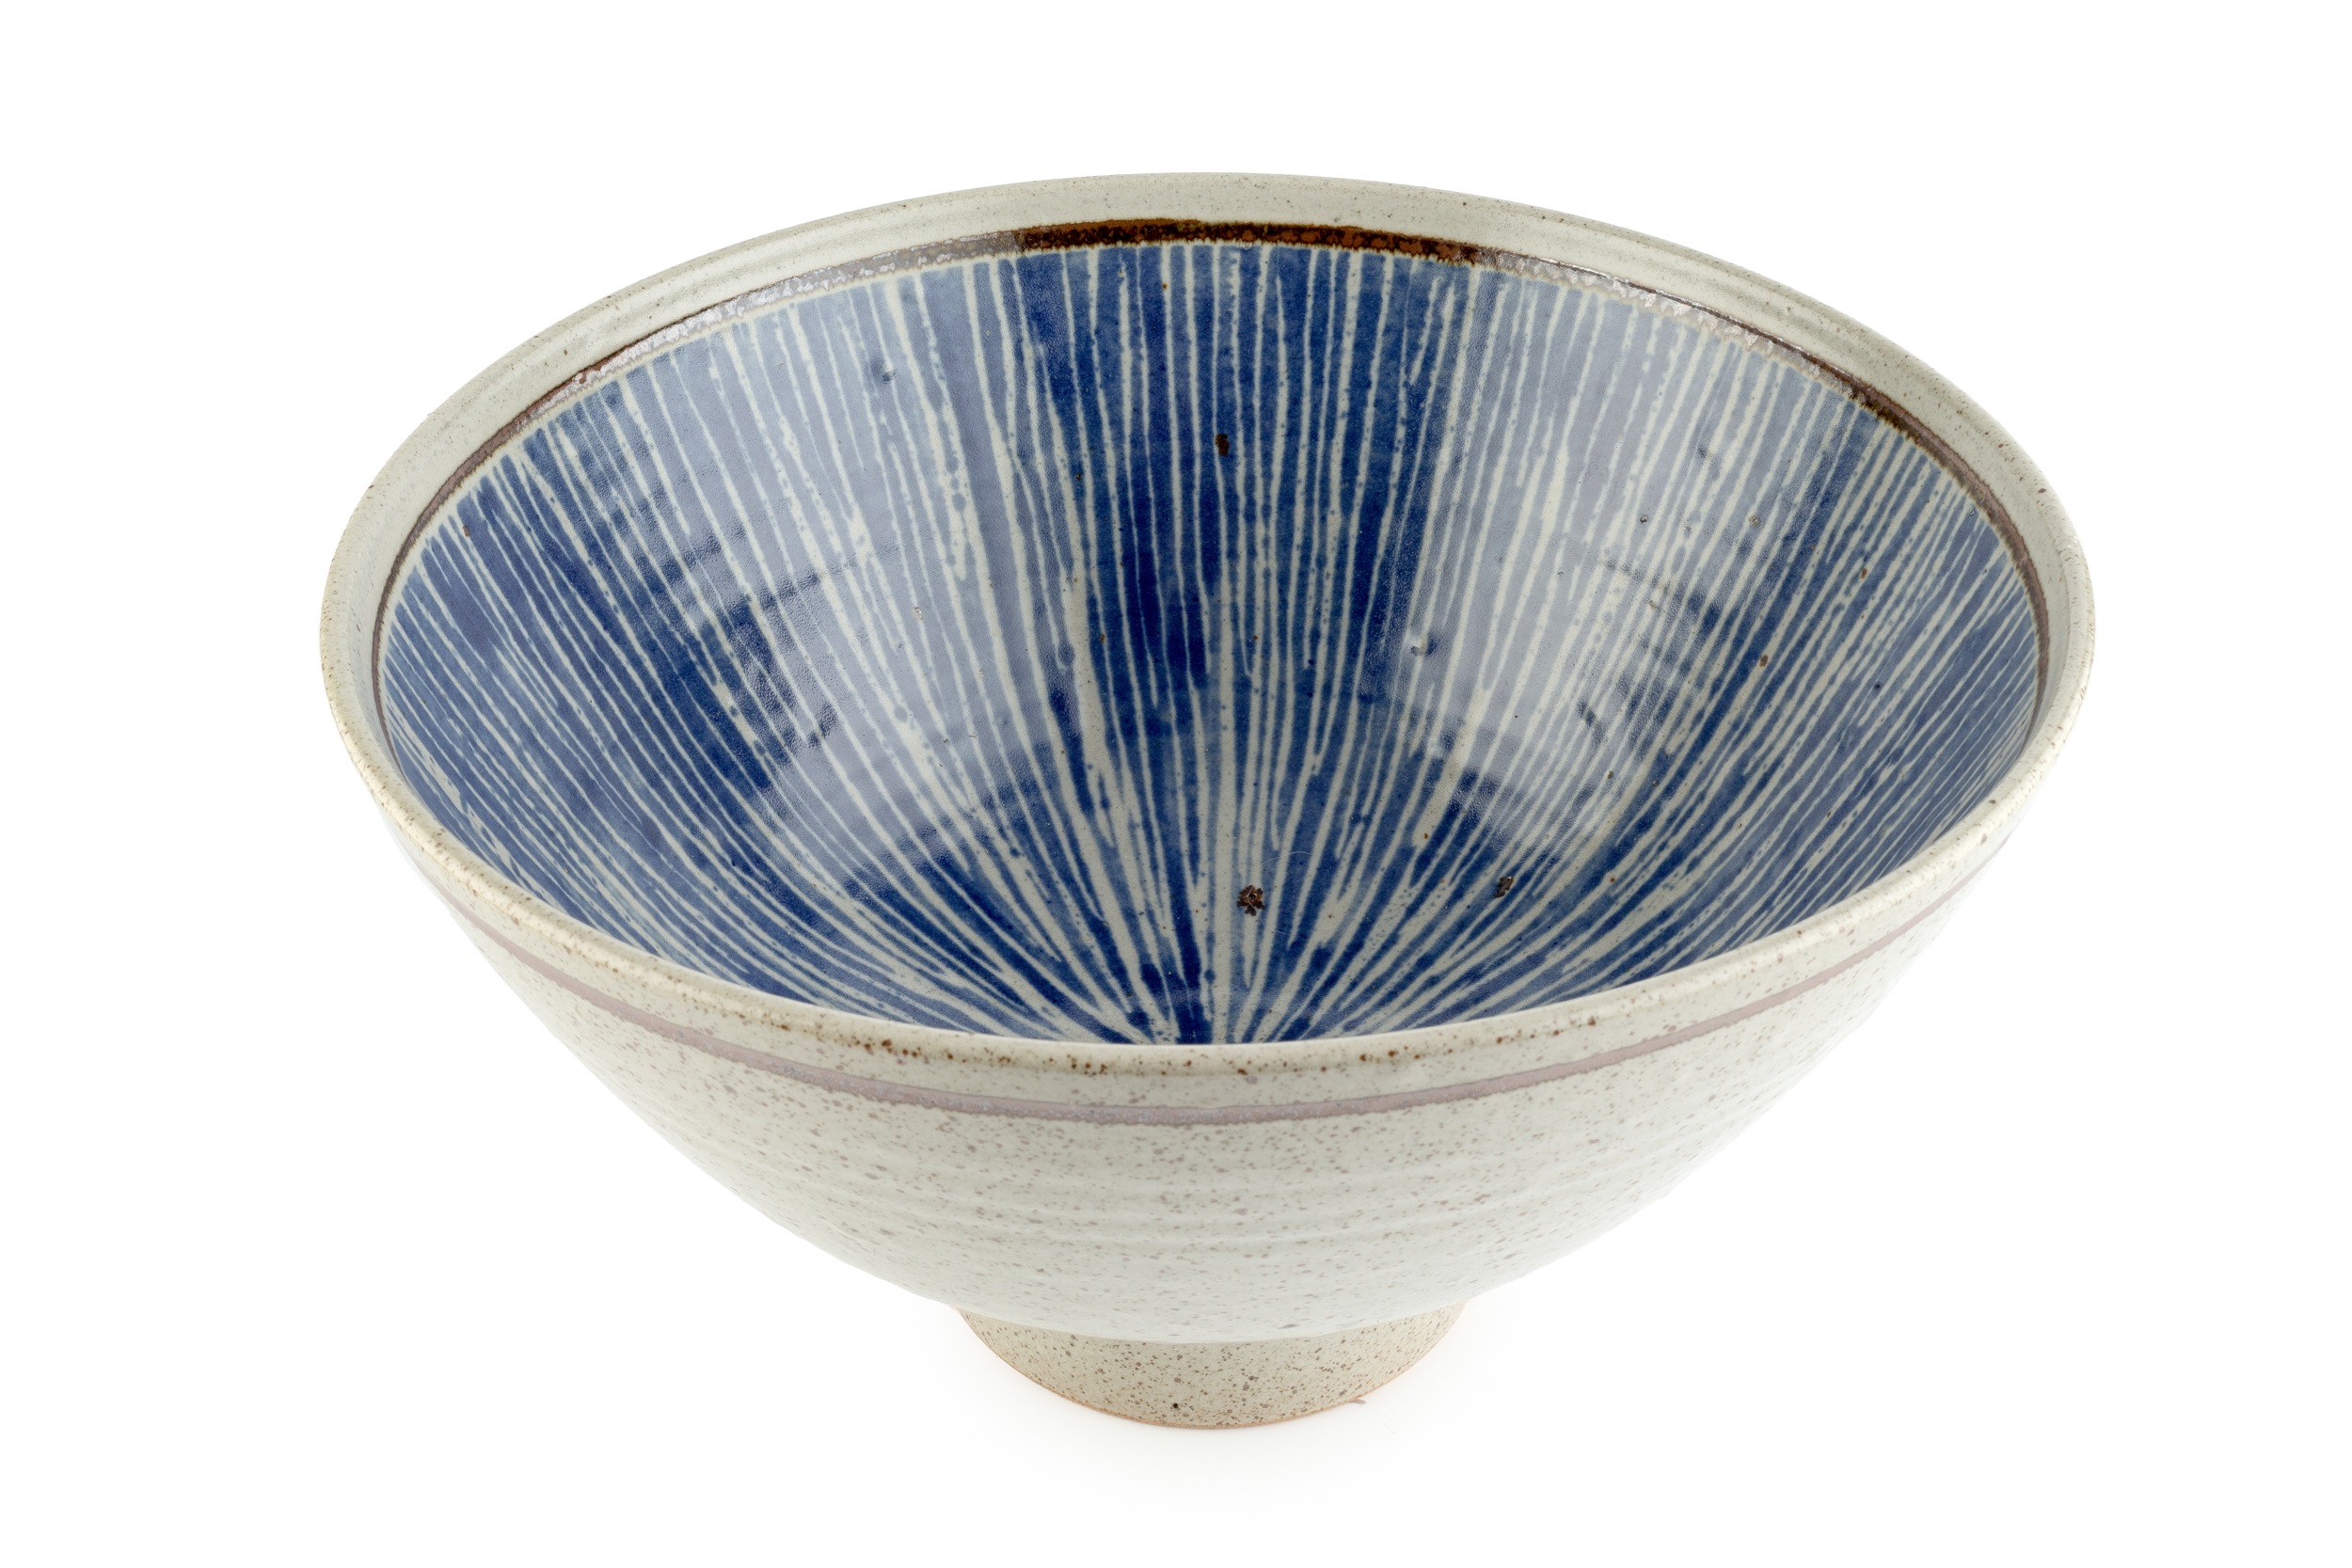 David Lloyd-Jones (1928-1994) Large footed bowl stoneware, with oatmeal glaze and blue lined pattern